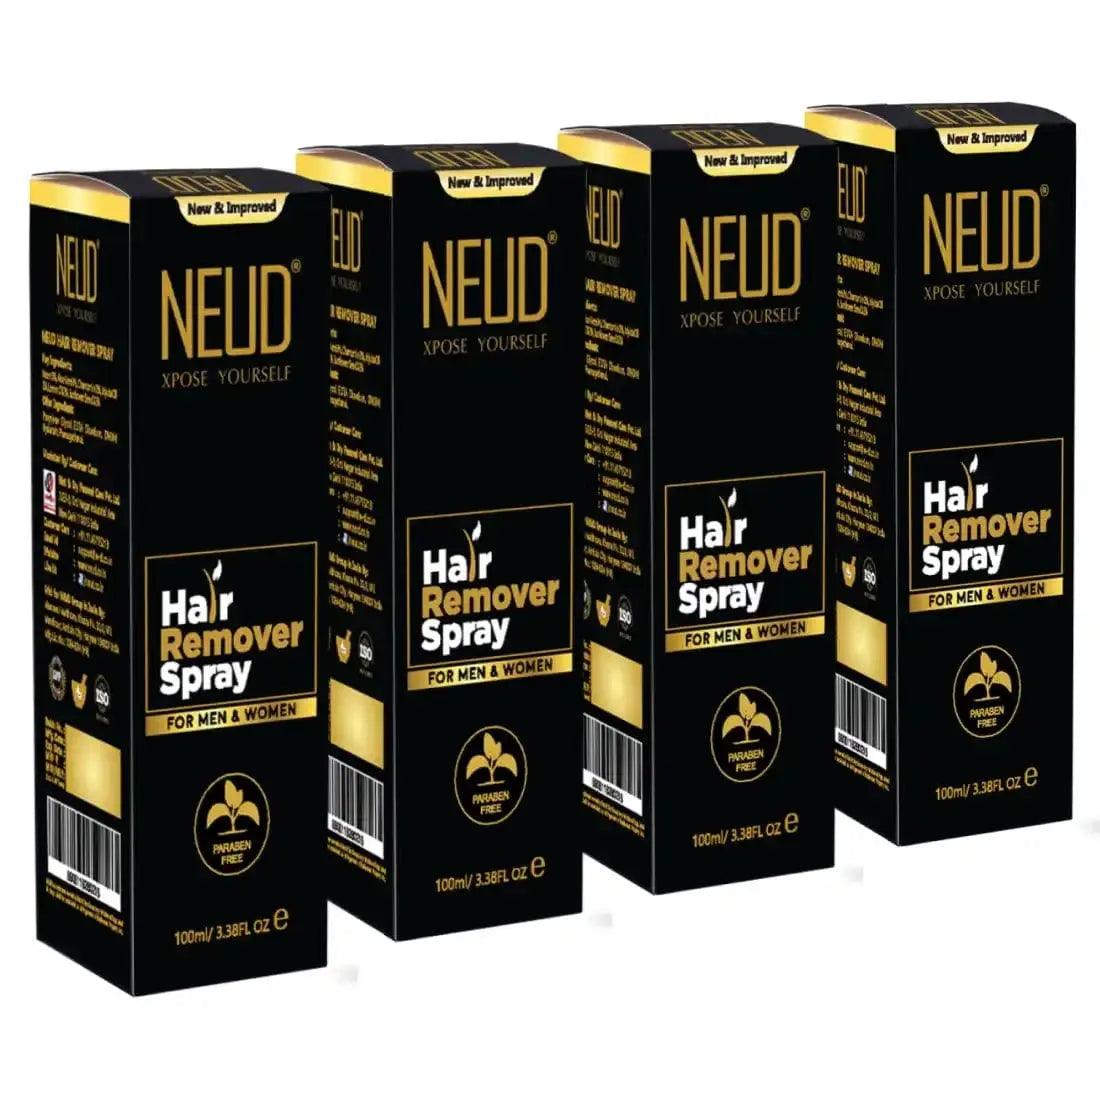 NEUD Hair Remover Spray with Retarding Effect of Natural Bio-Actives for Men & Women - 100 ml 8903540011586